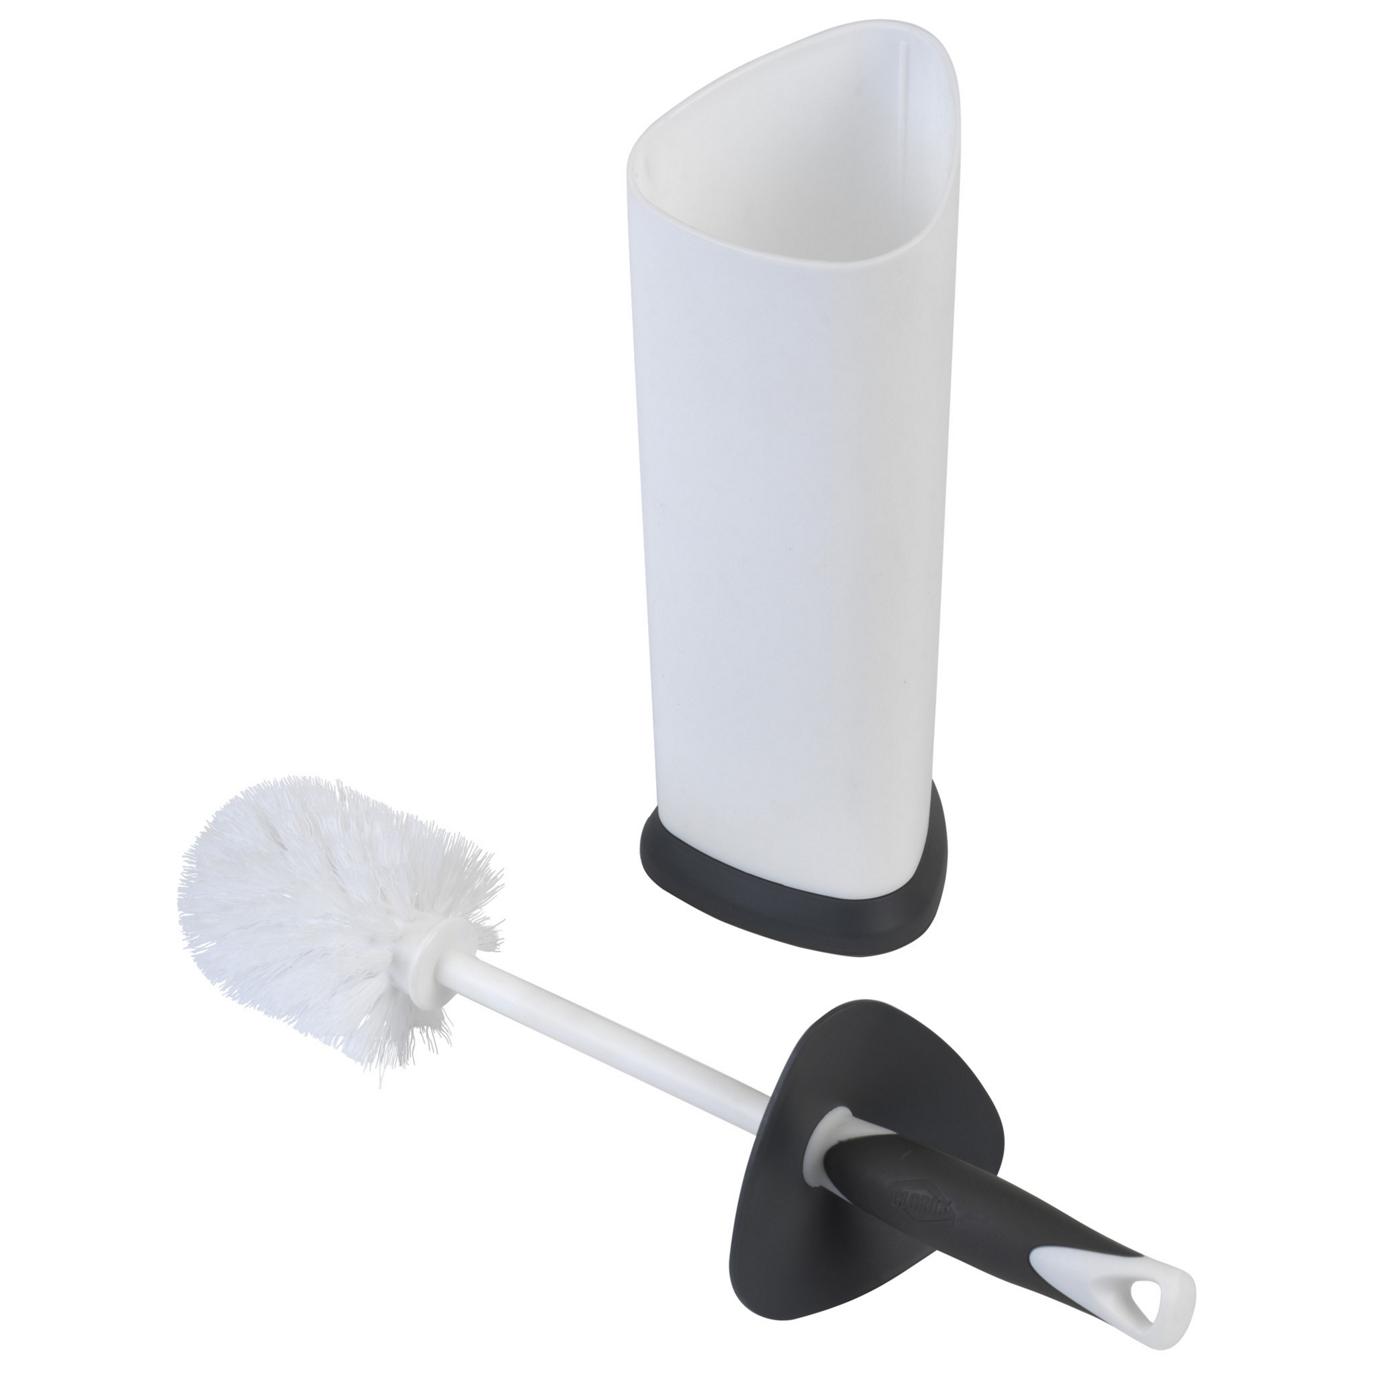 Clorox Covered Toilet Bowl Brush; image 2 of 2